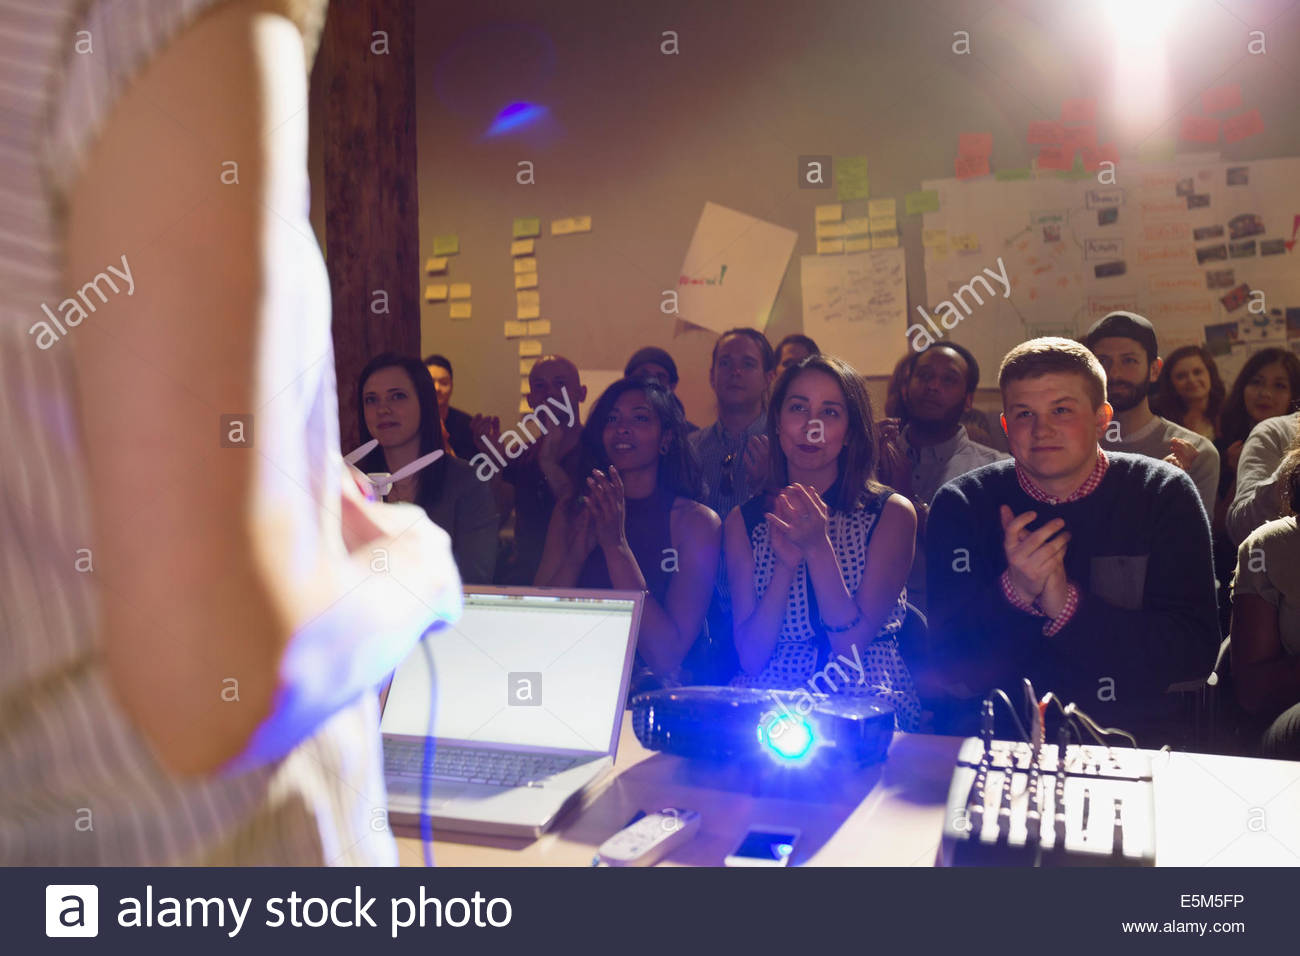 Audience clapping for speaker Stock Photo